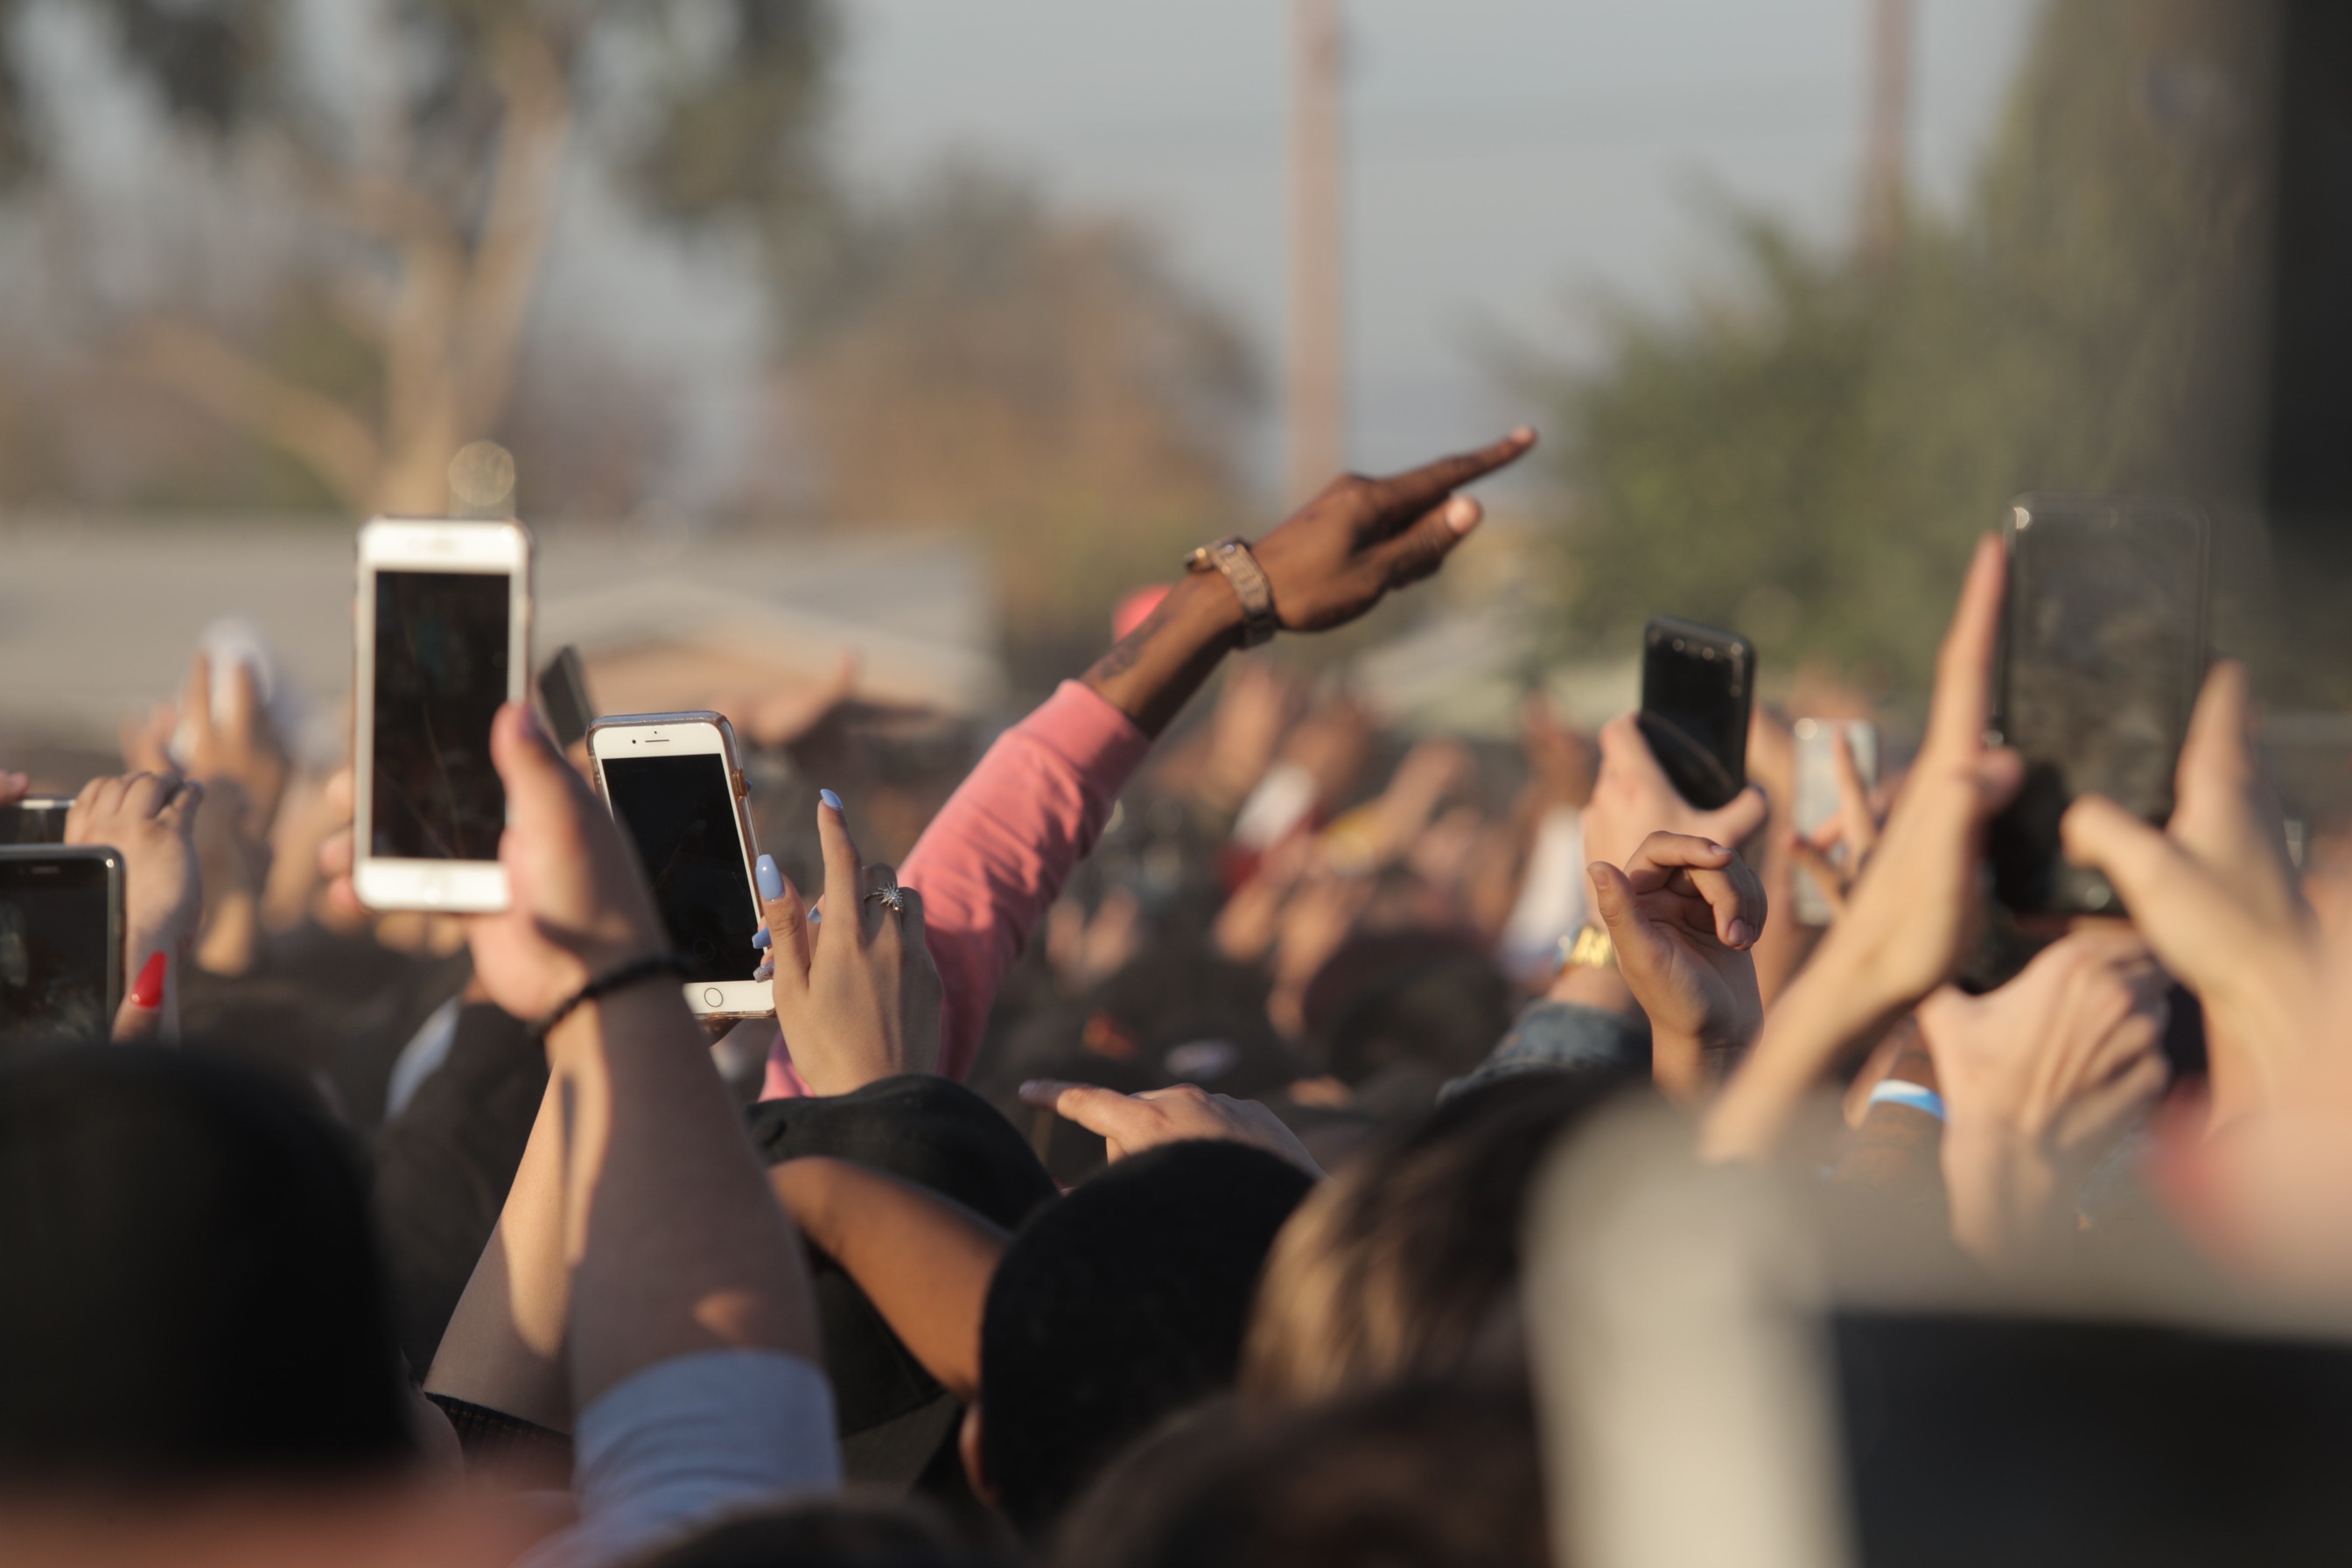 People in a crowd raise their arms and their phones.